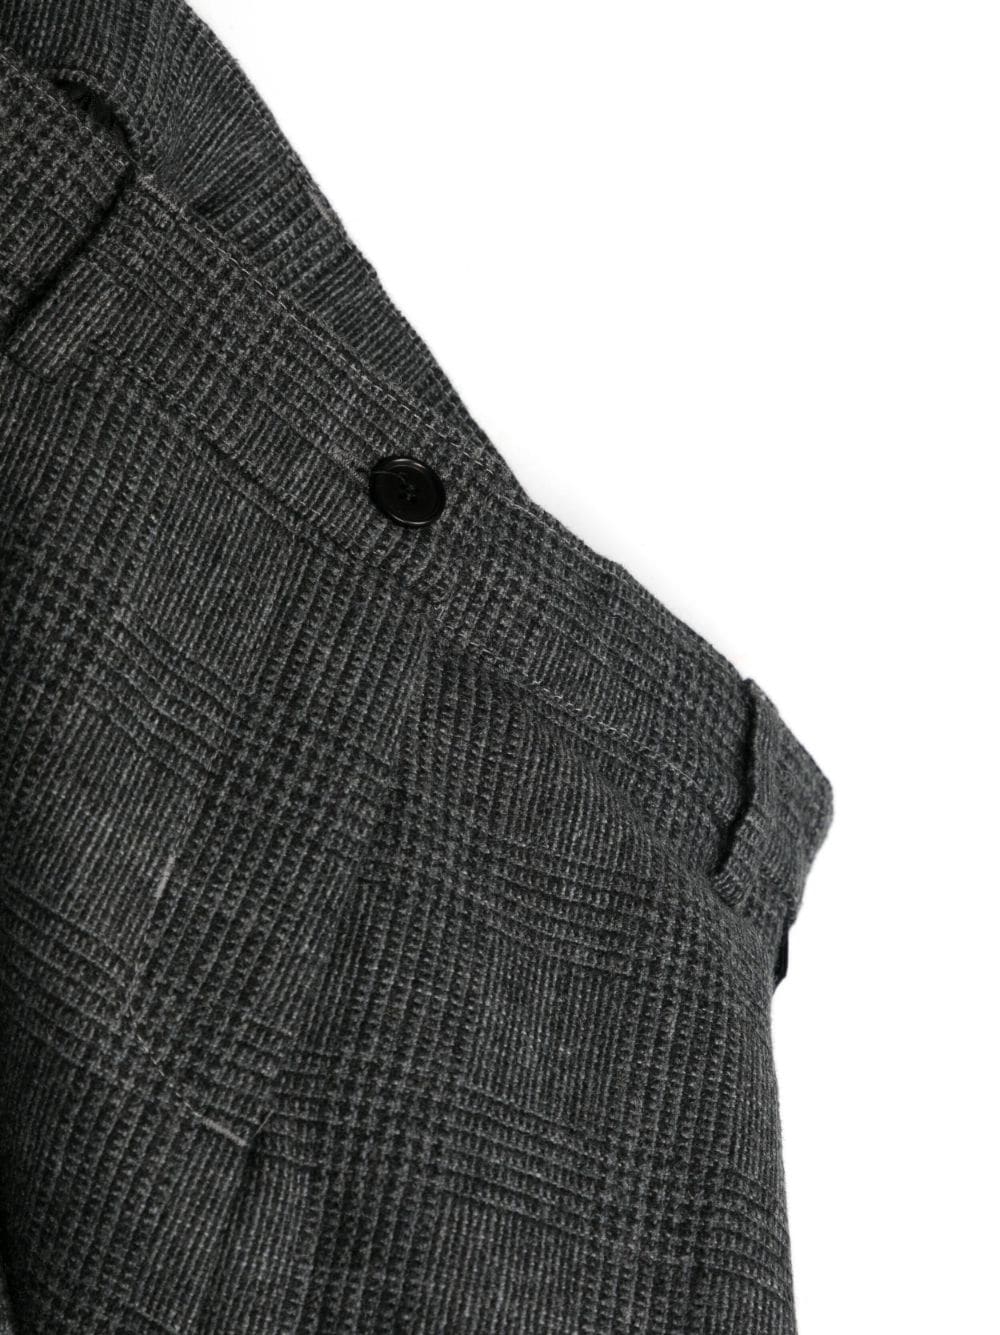 Shop Aspesi Checked Pleated Trousers In Grey